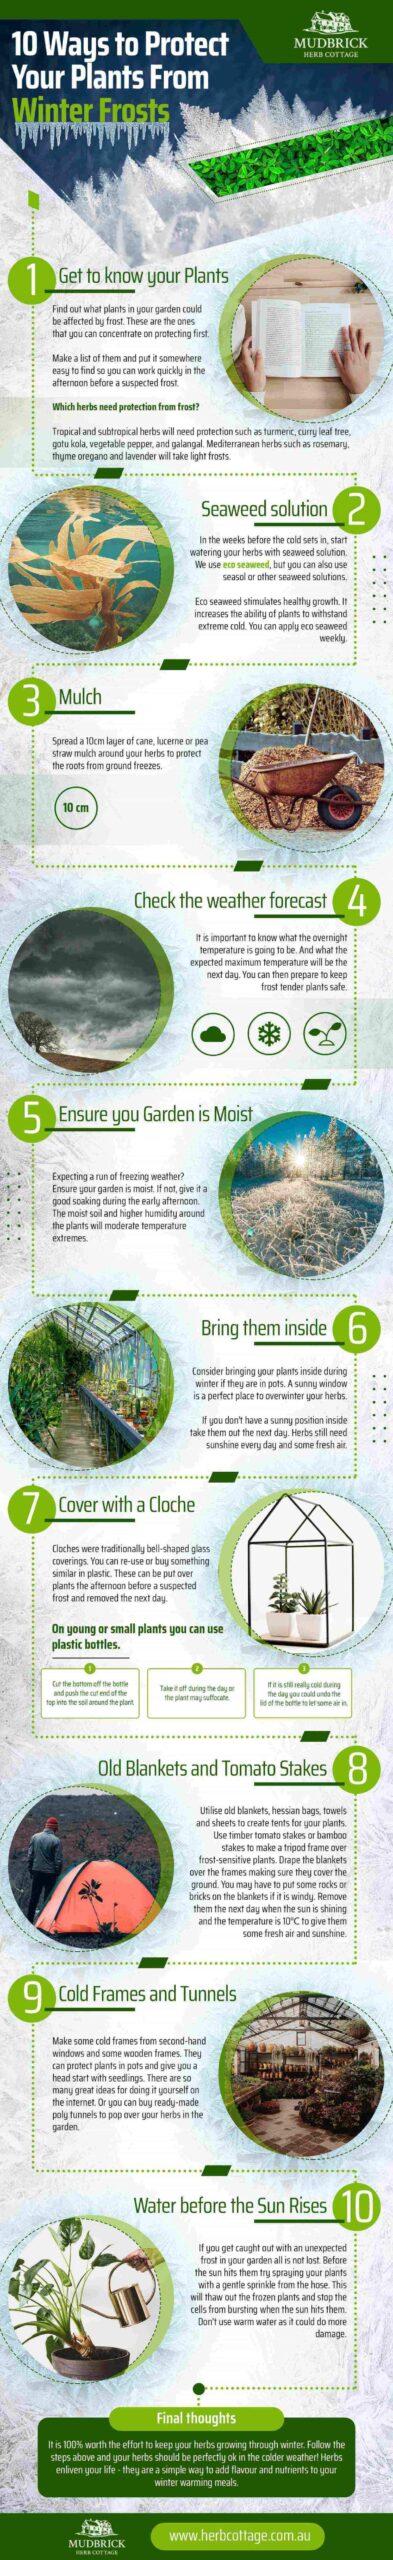 Protect Your Plants From Winter Frosts